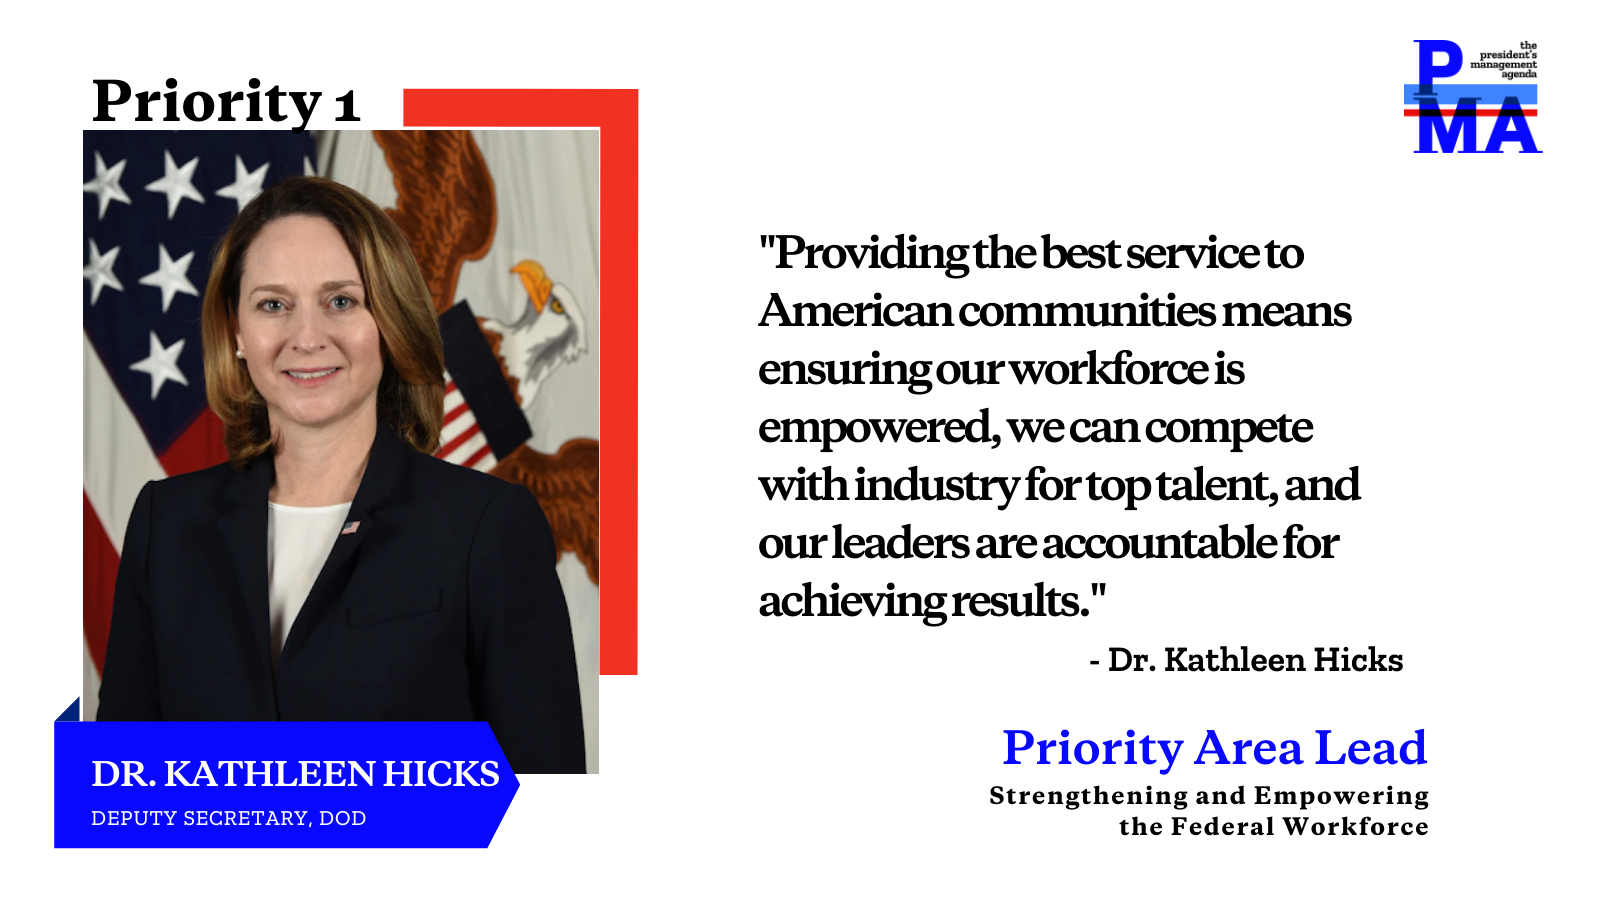 Social card of Dr. Kathleen Hicks with text: Providing the best service to American communities means ensuring our workforce is empowered, we can compete with industry for top talent, and our leaders are accountable for achieving results.